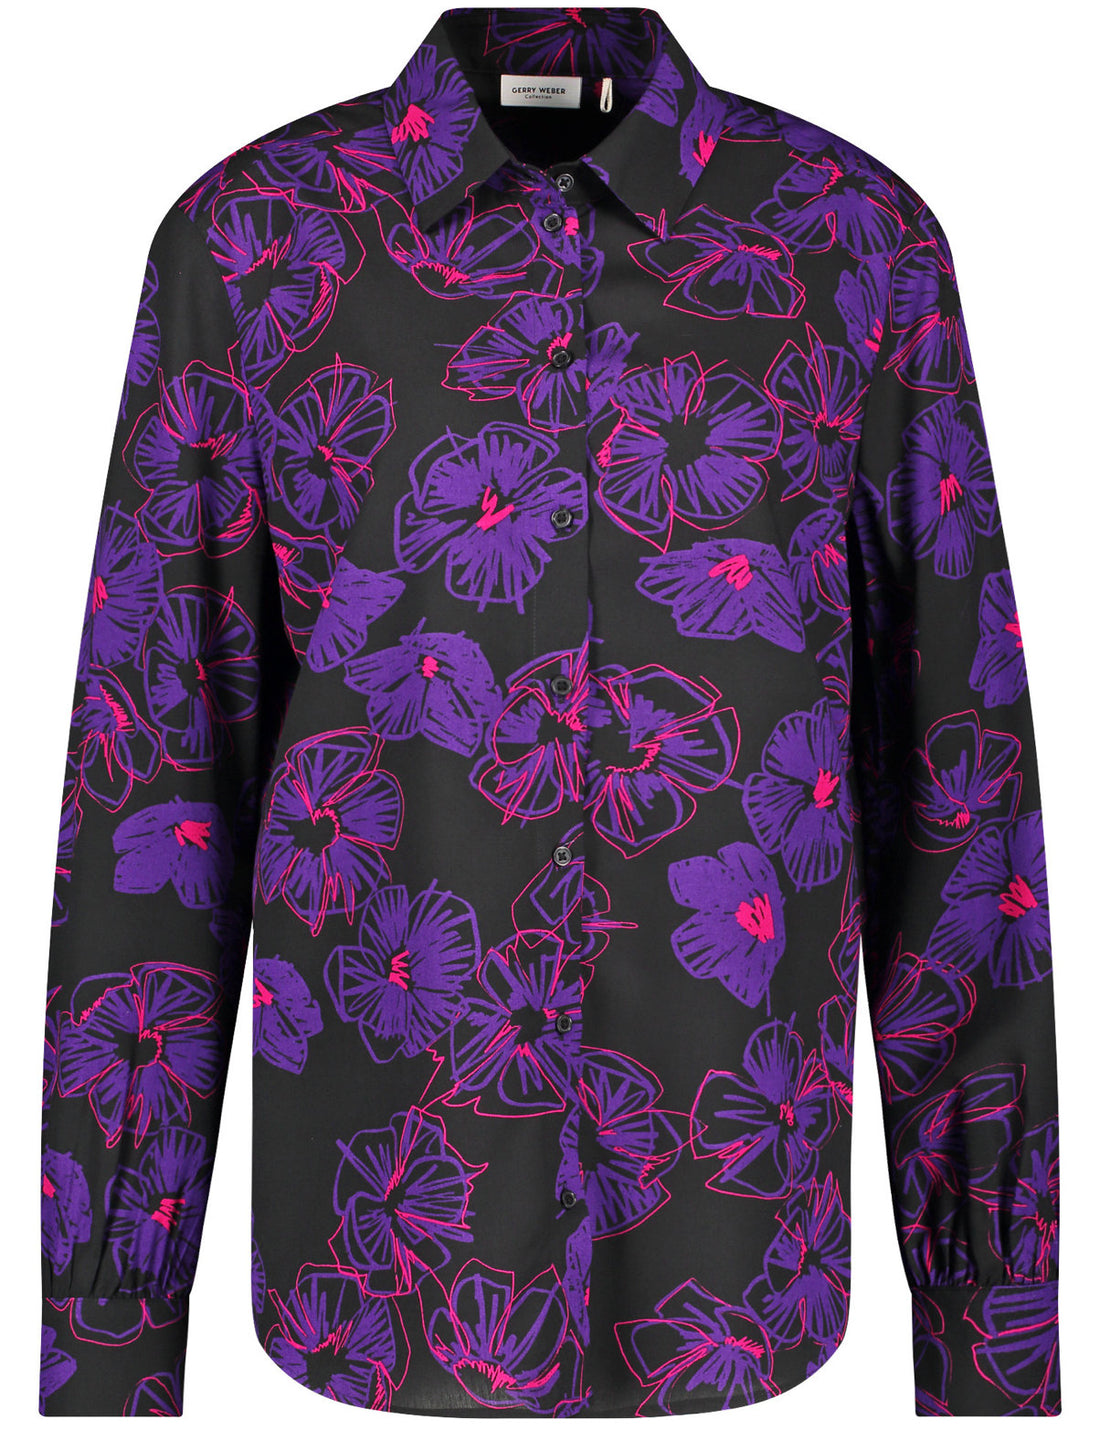 Long Sleeve Blouse With A Floral Pattern_260050-31445_1038_02